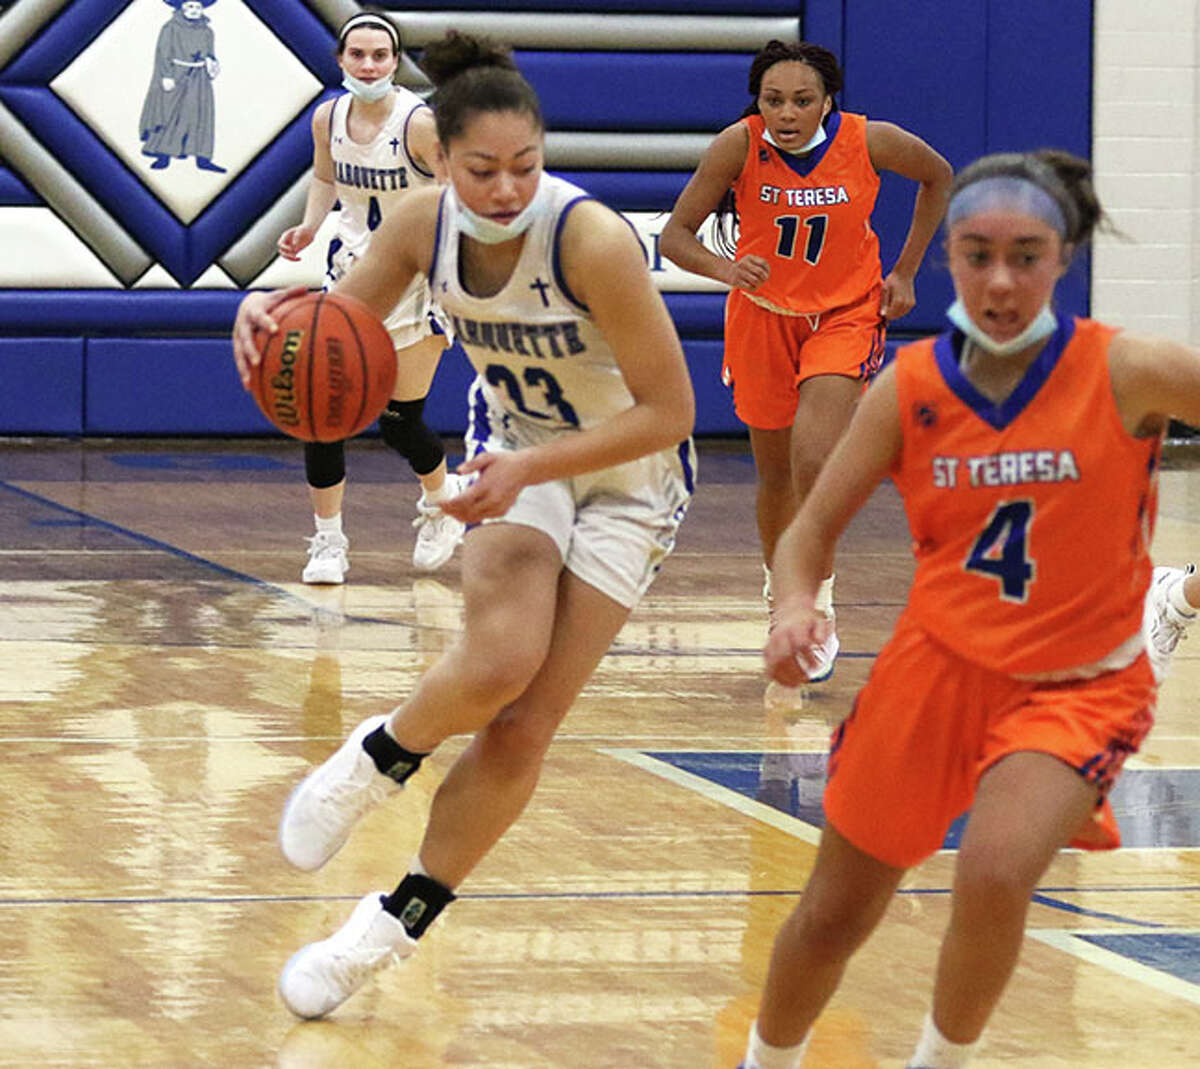 Marquette's Alyssa Powell (left), shown bringing the ball upcourt against Decatur St. Teresa earlier this month in Alton, had 20 points and 12 rebounds in Wednesday's loss at East St. Louis.